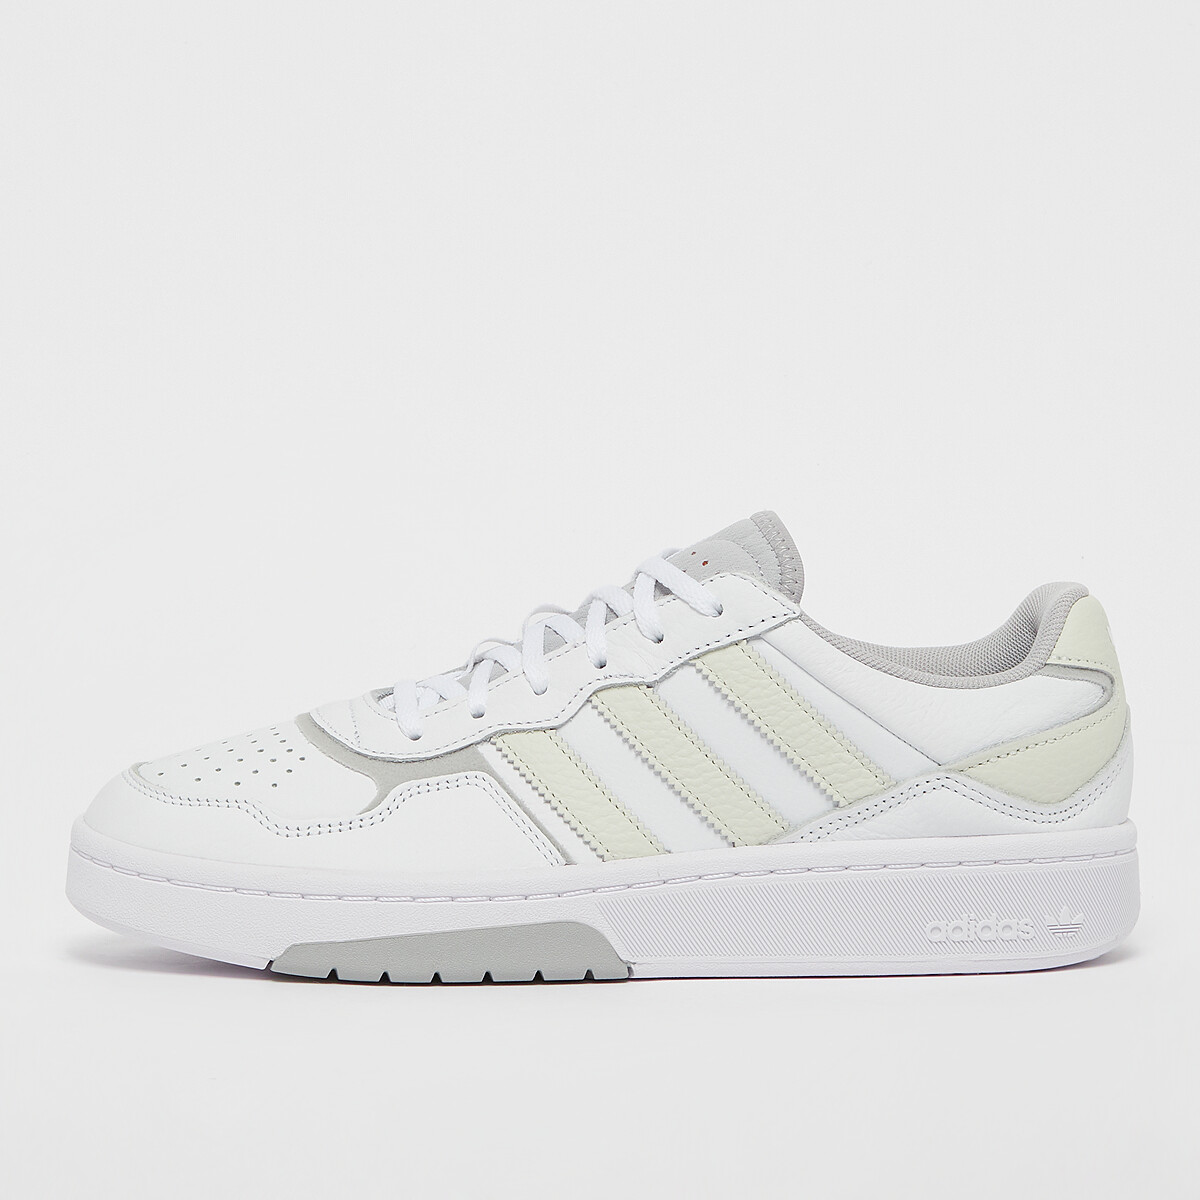 Buy Adidas Courtic cloud white/off white/white tint from £45.00 (Today ...